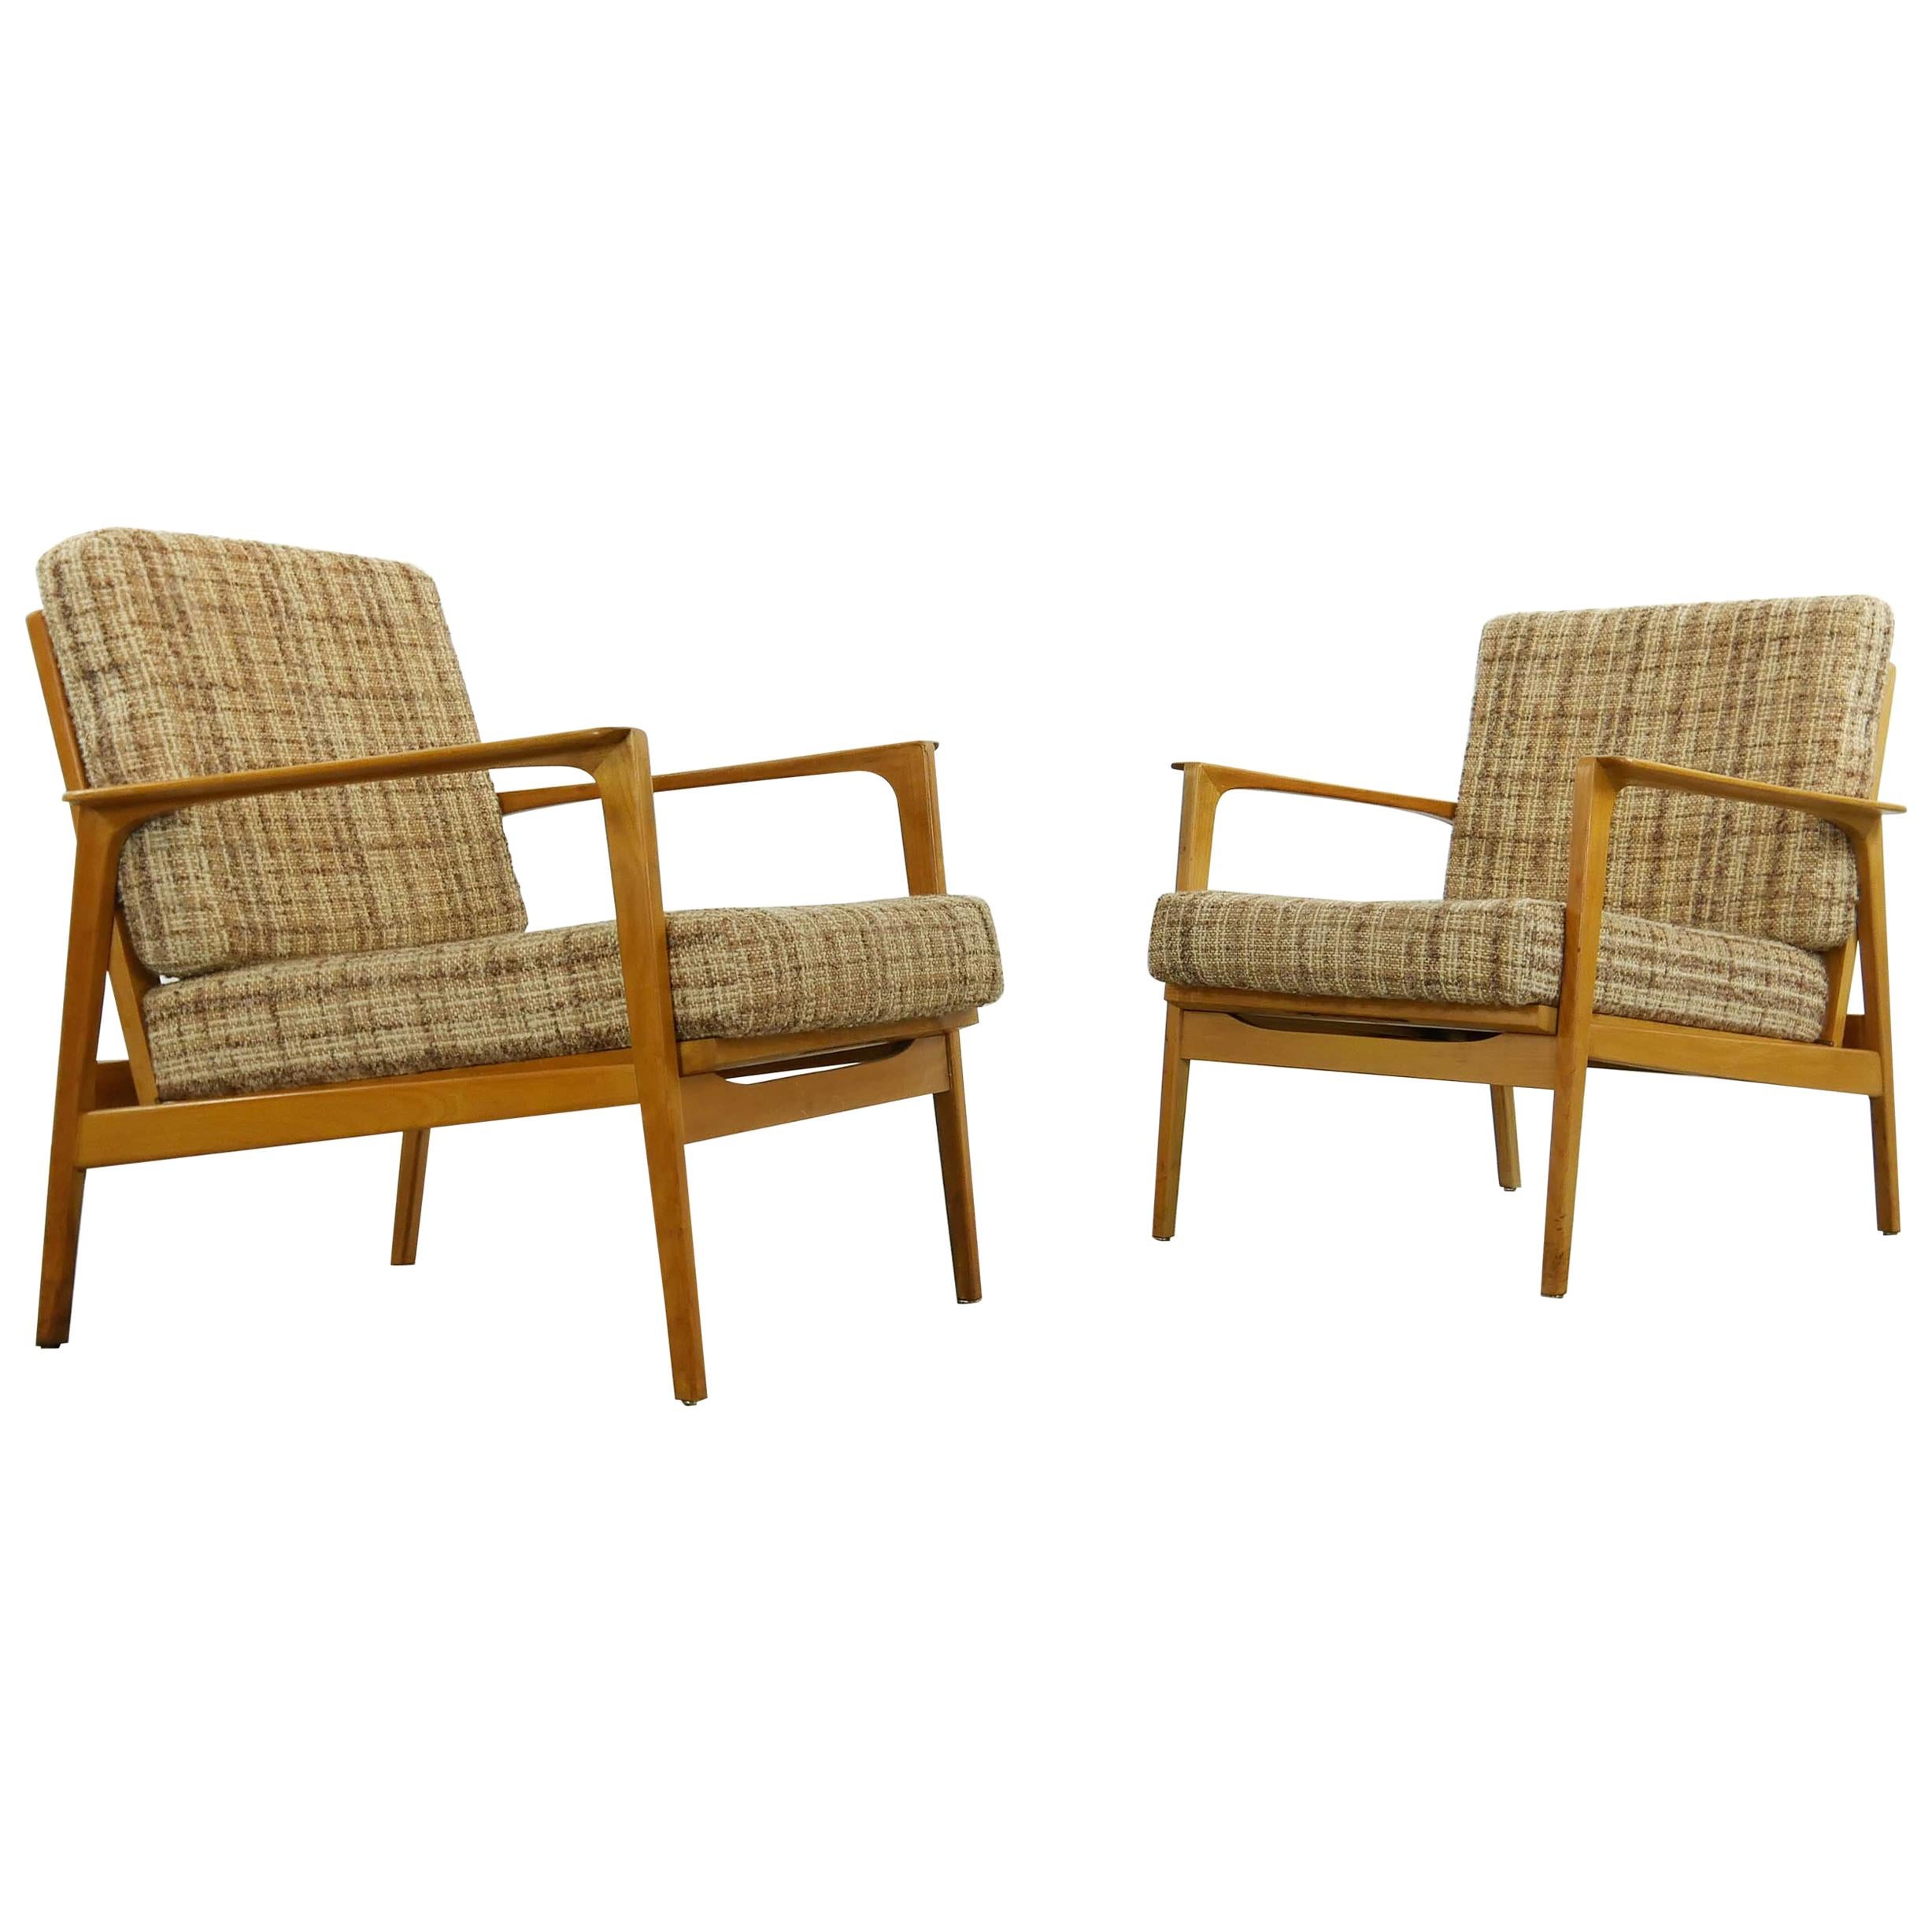 Pair of midcentury Armchairs, Convertible 1960s Lounge-Chairs of Solid Beech